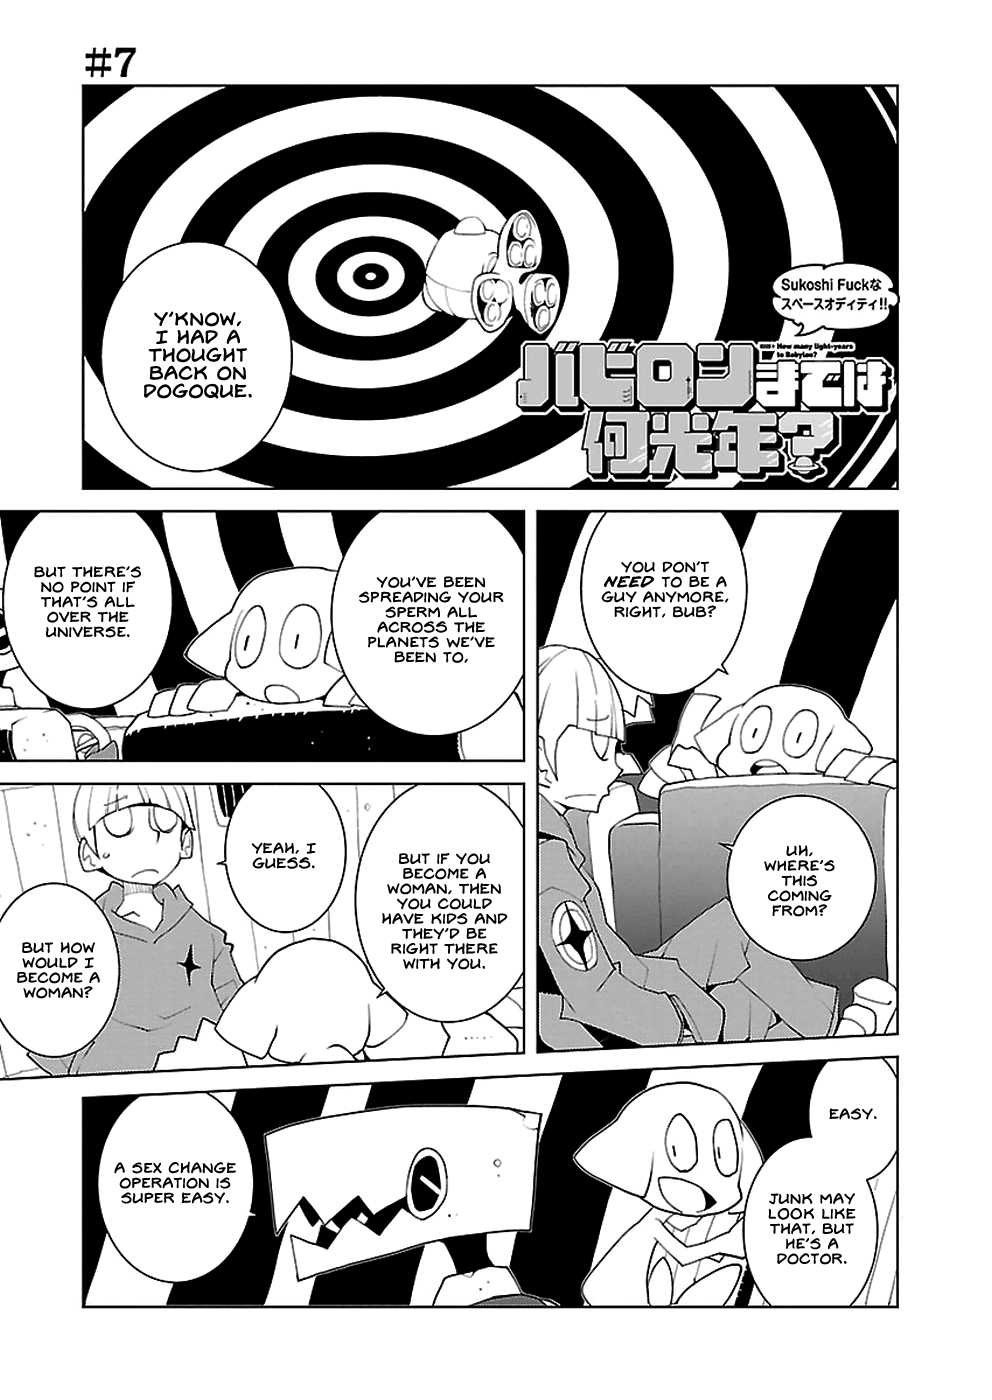 How Many Light Years to Babylon? Vol. 1 Ch. 7